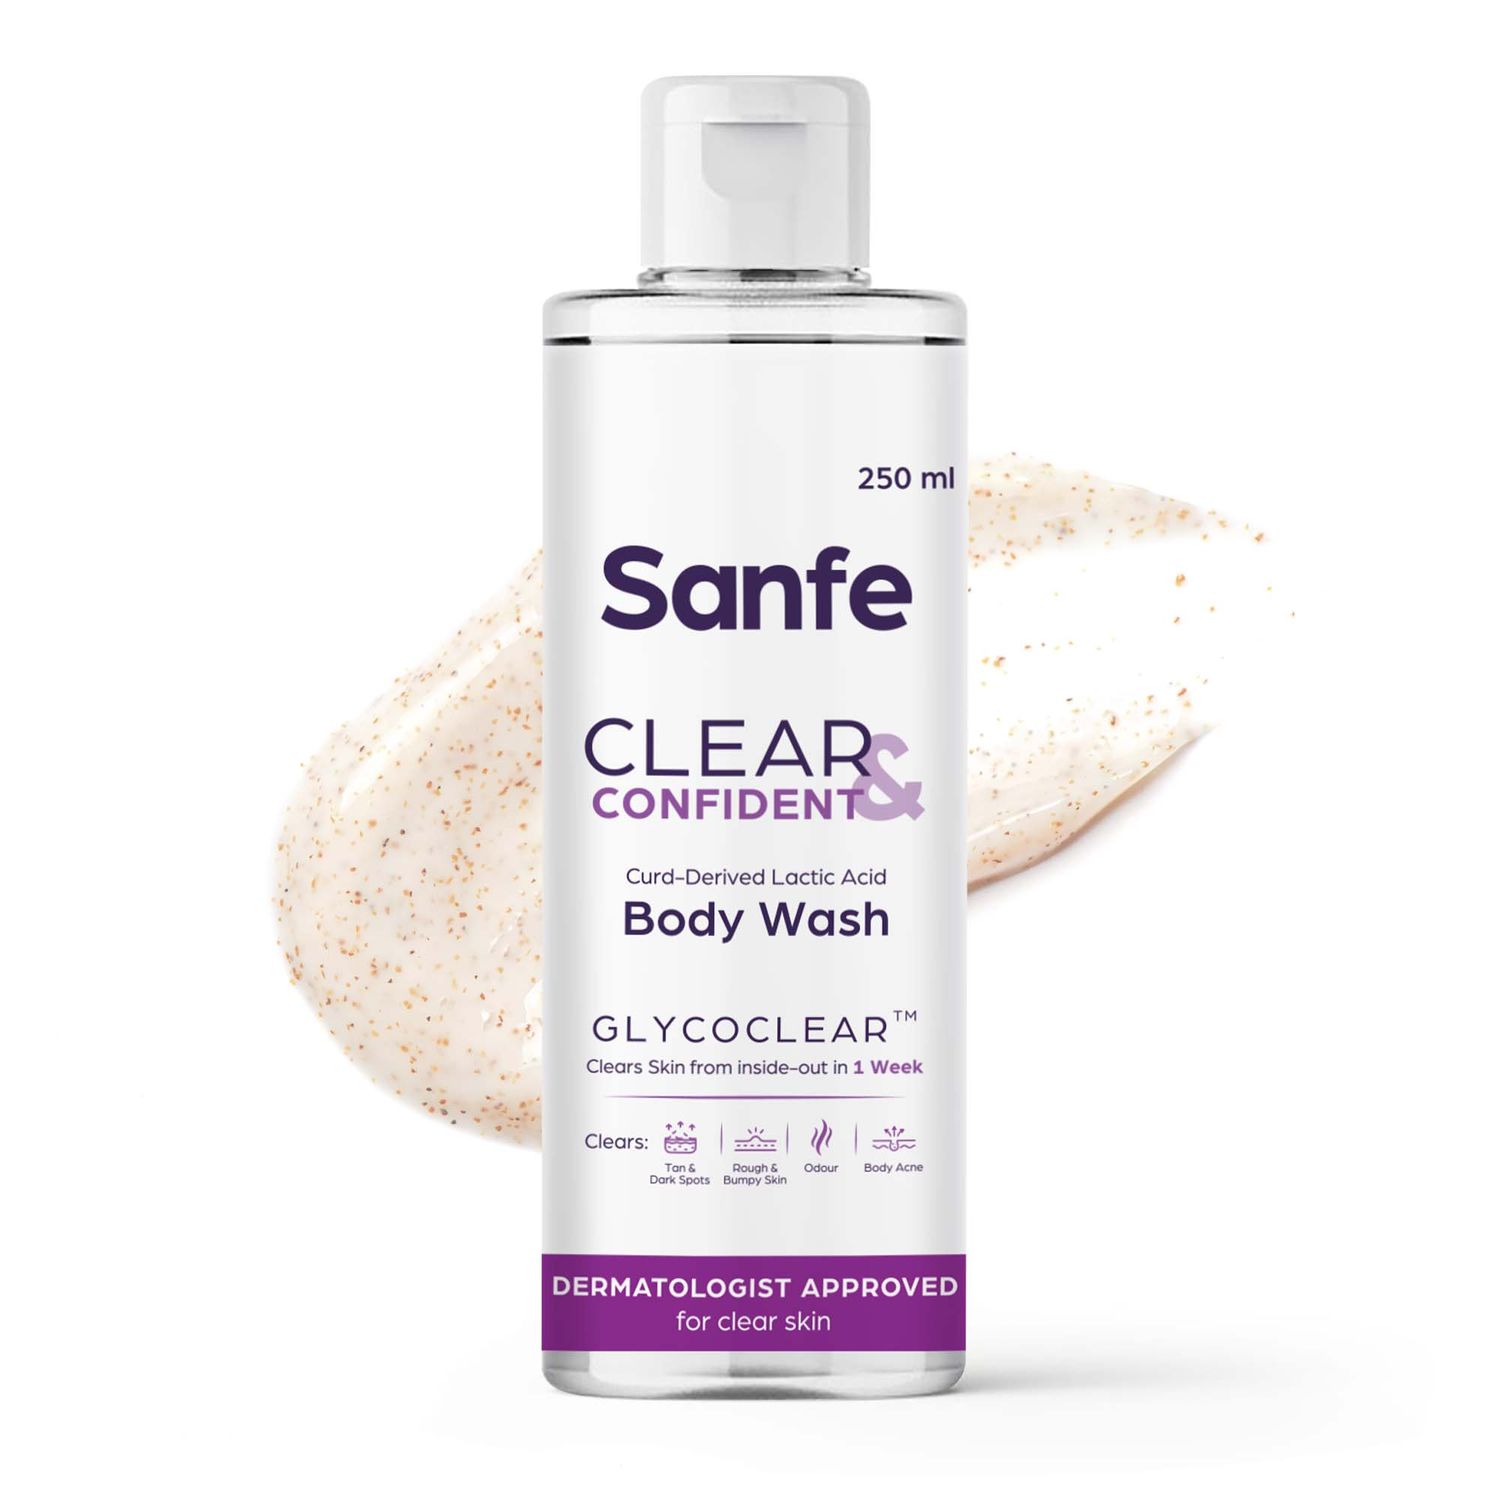 Buy Sanfe Clear & Confident Glycolic Acid Body Wash | AHA Exfoliating Body Wash for Rough Bumpy Skin & Strawberry Skin | Smooth Skin from 1st Use | 250ml - Purplle